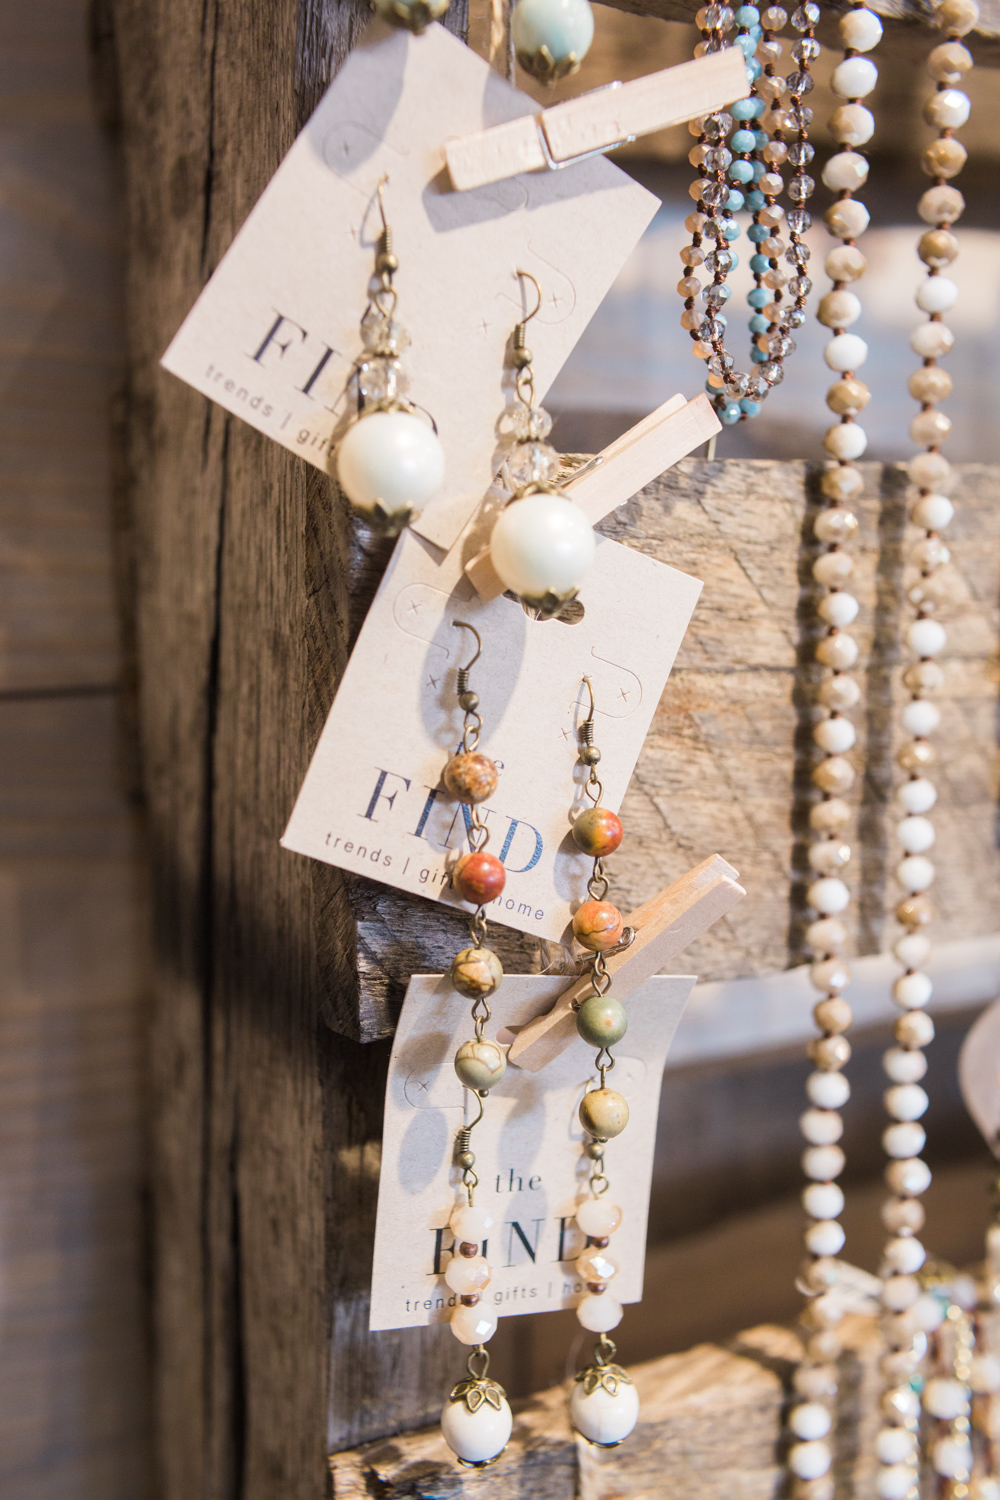 THE FIND BOUTIQUE WIMBERLEY TEXAS-85.jpg